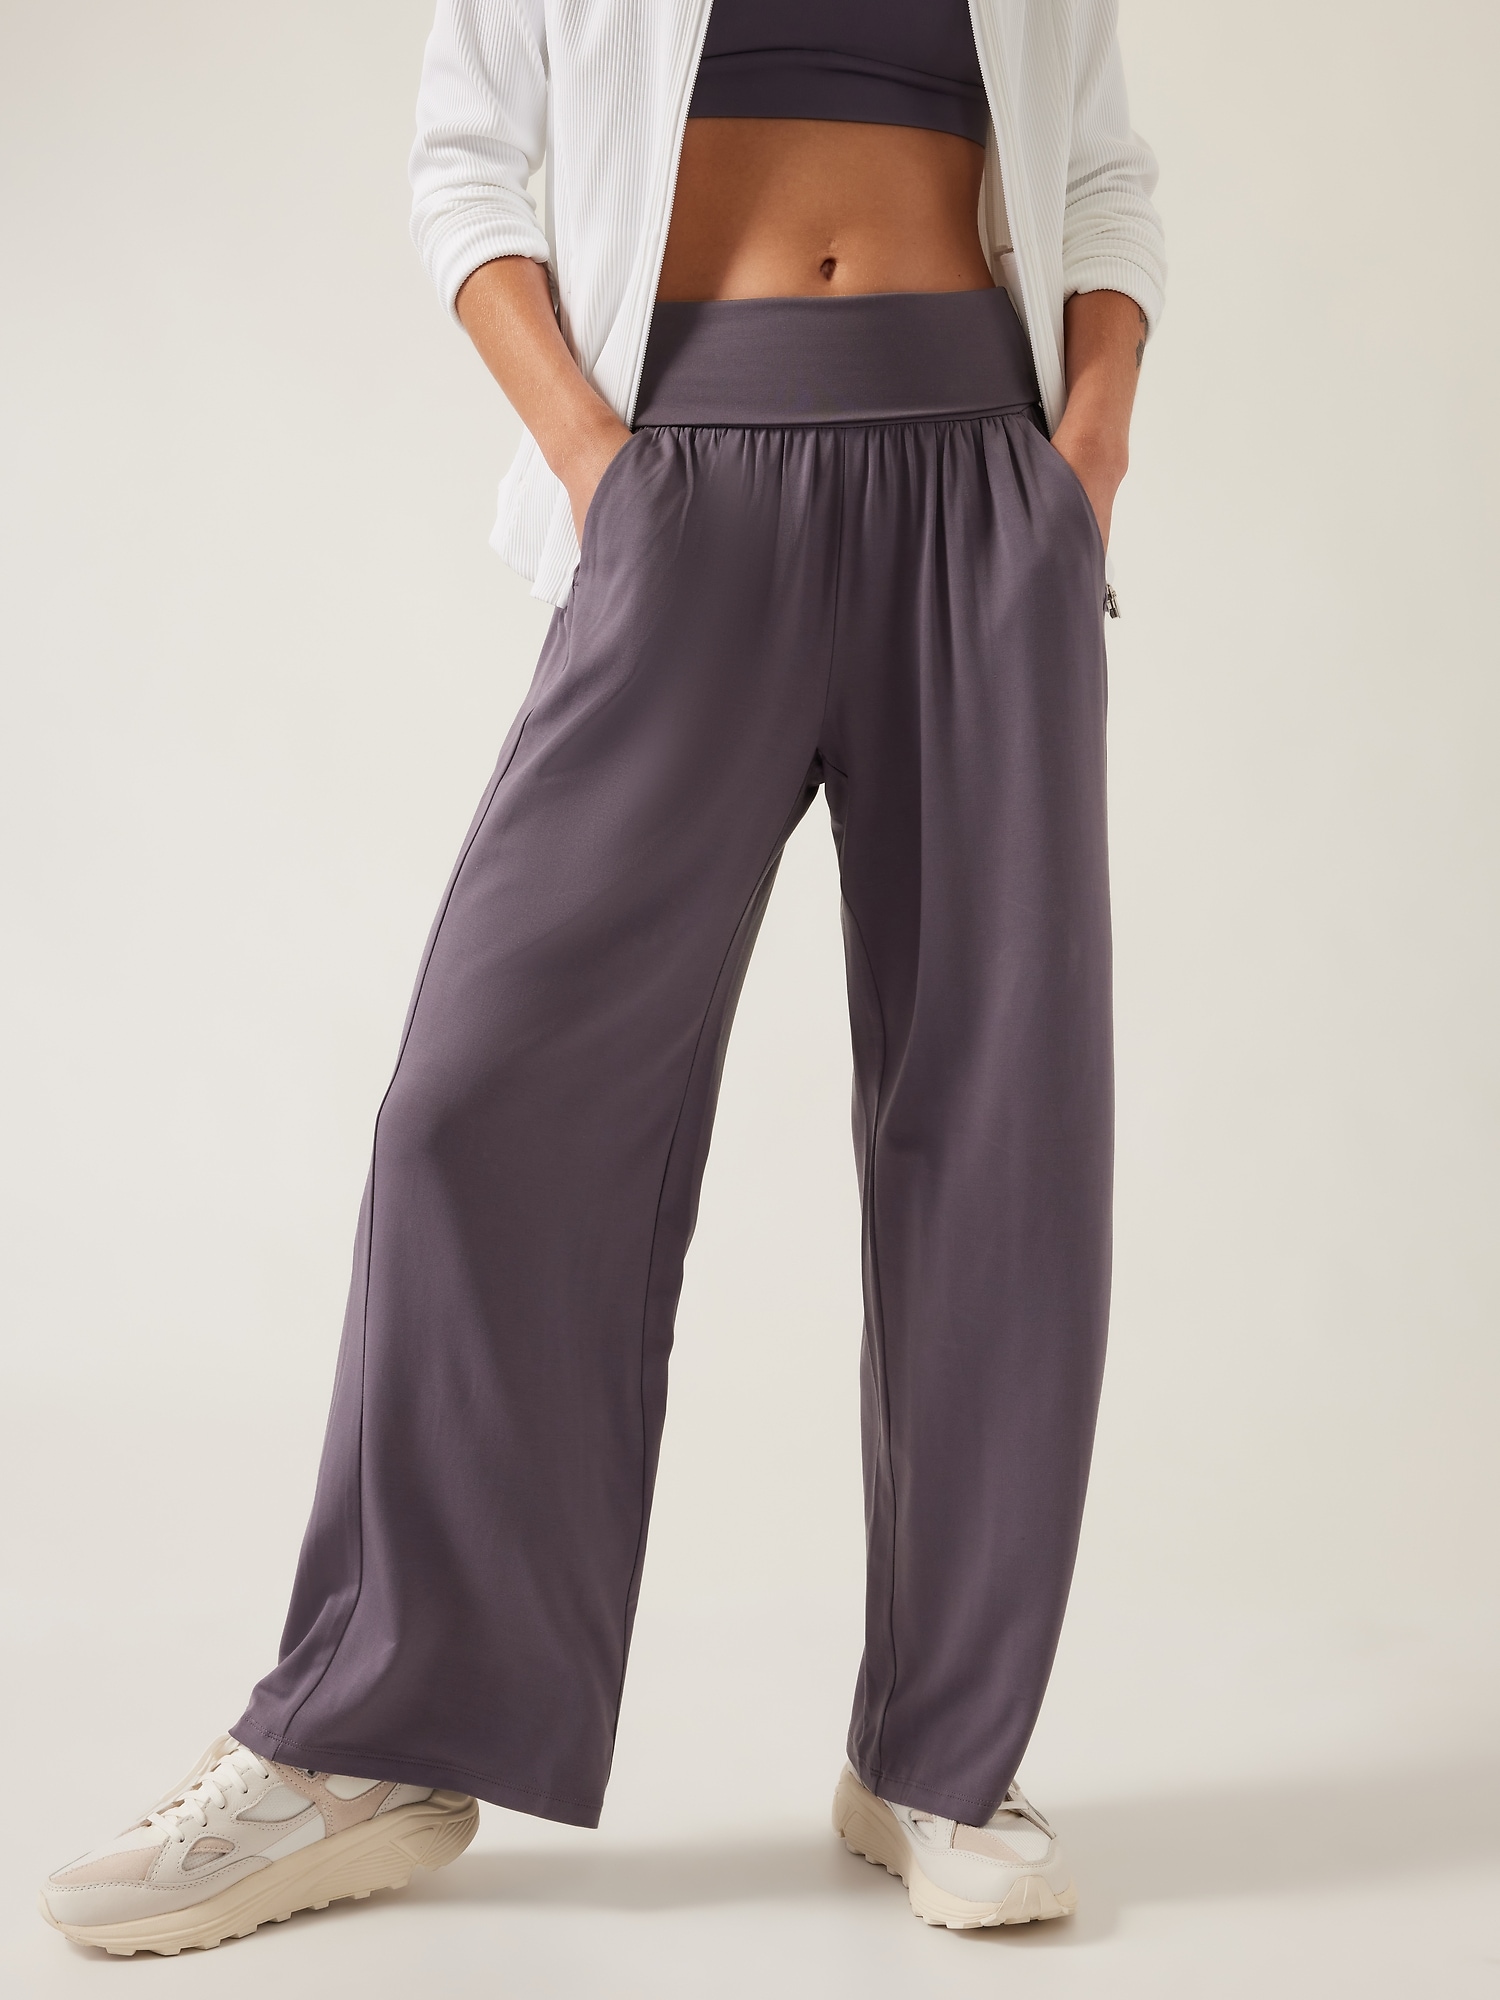 Workout Flare Pants